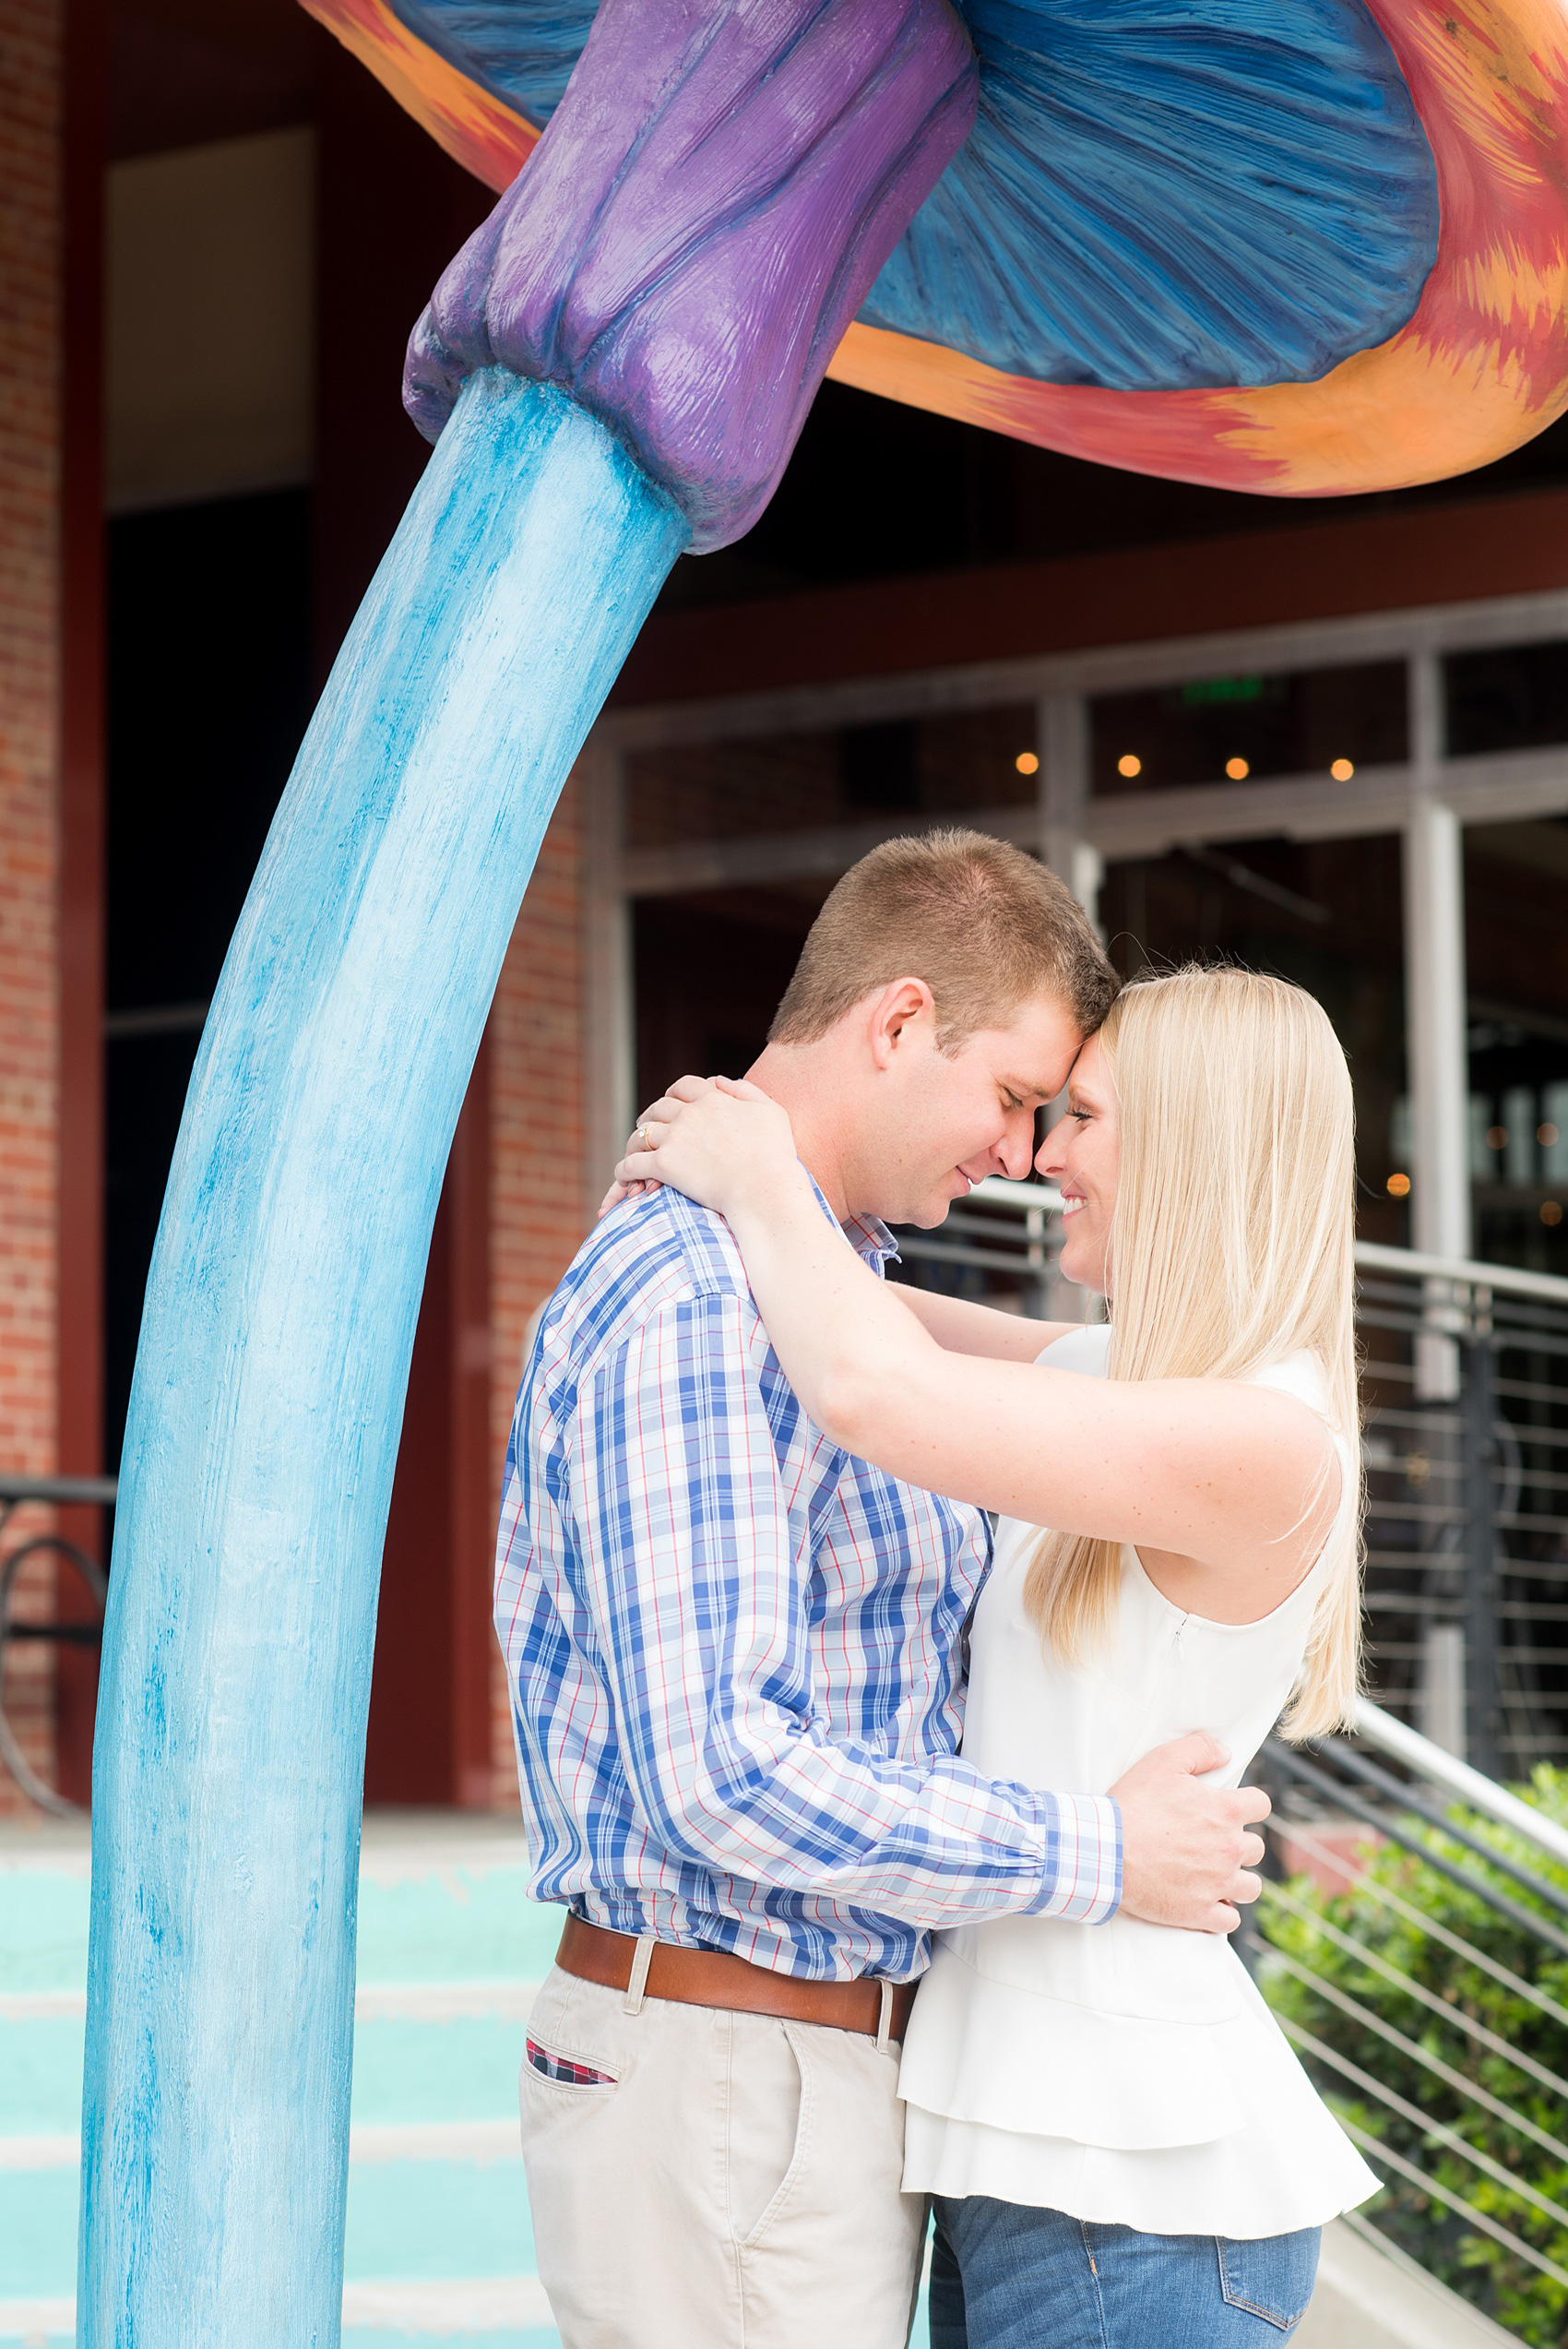 Mikkel Paige Photography photos from an engagement session at Durham's American Tobacco Campus in North Carolina. Colorful picture of the couple!